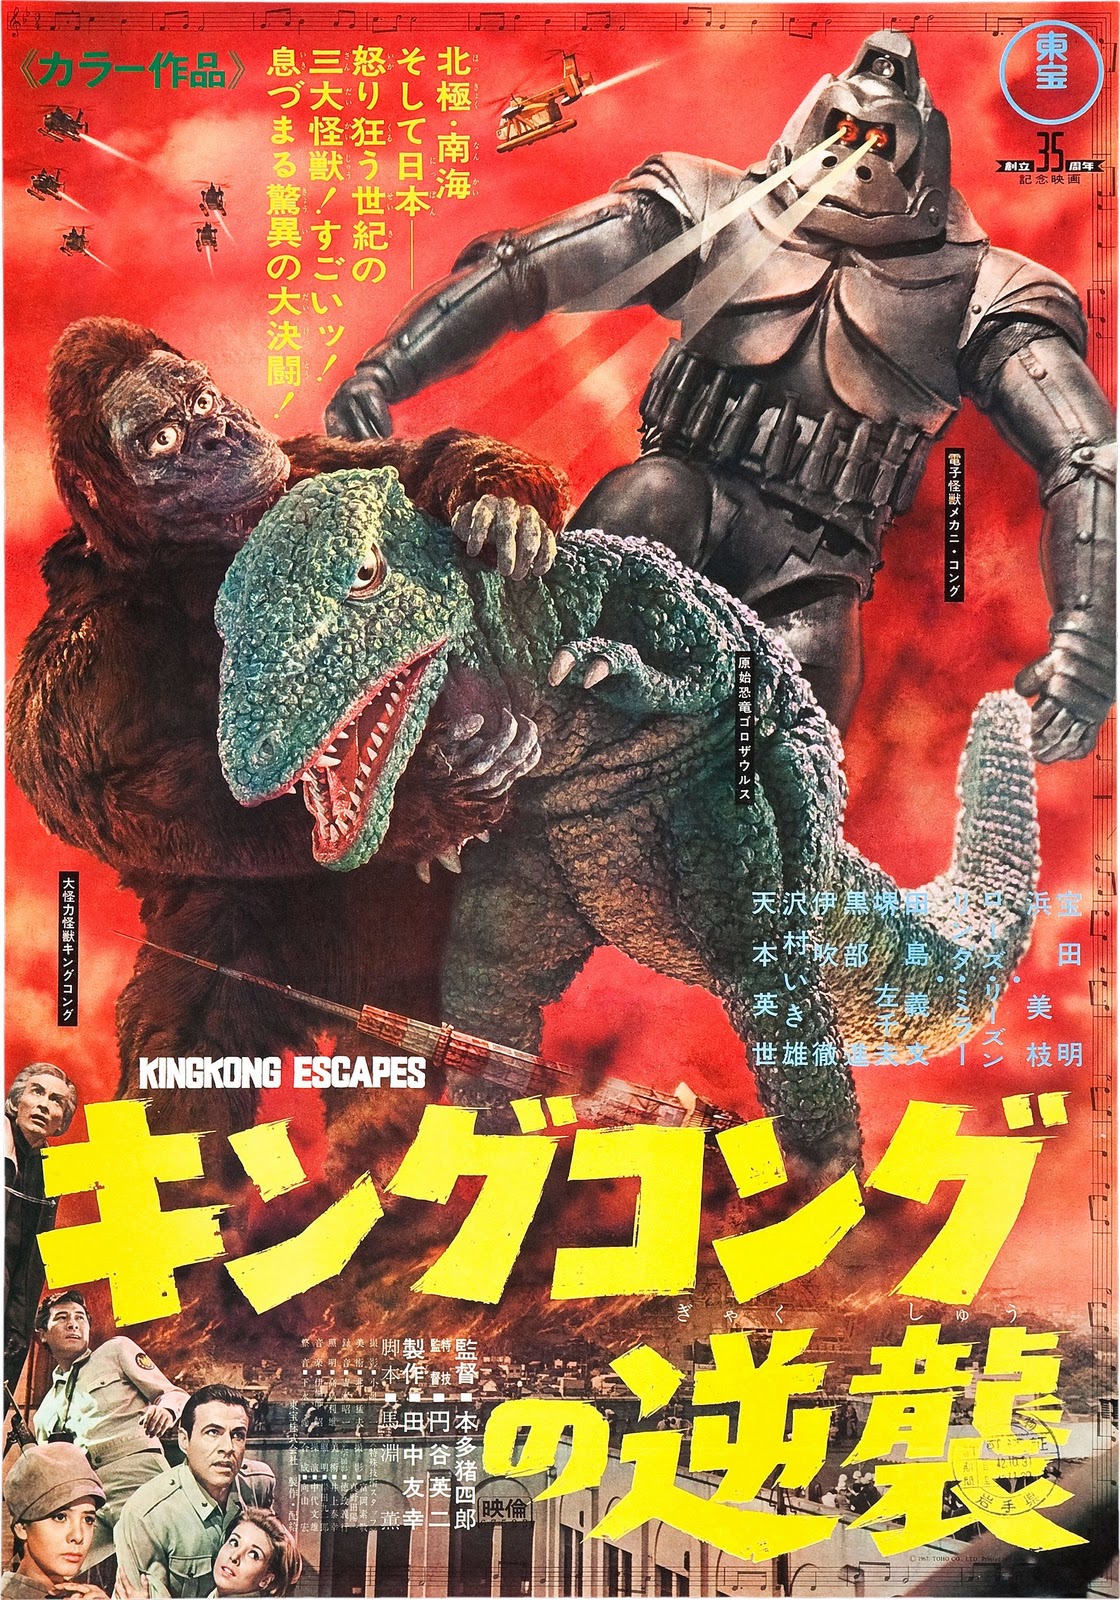 King Kong Escapes (1967) with English Subtitles on DVD on DVD